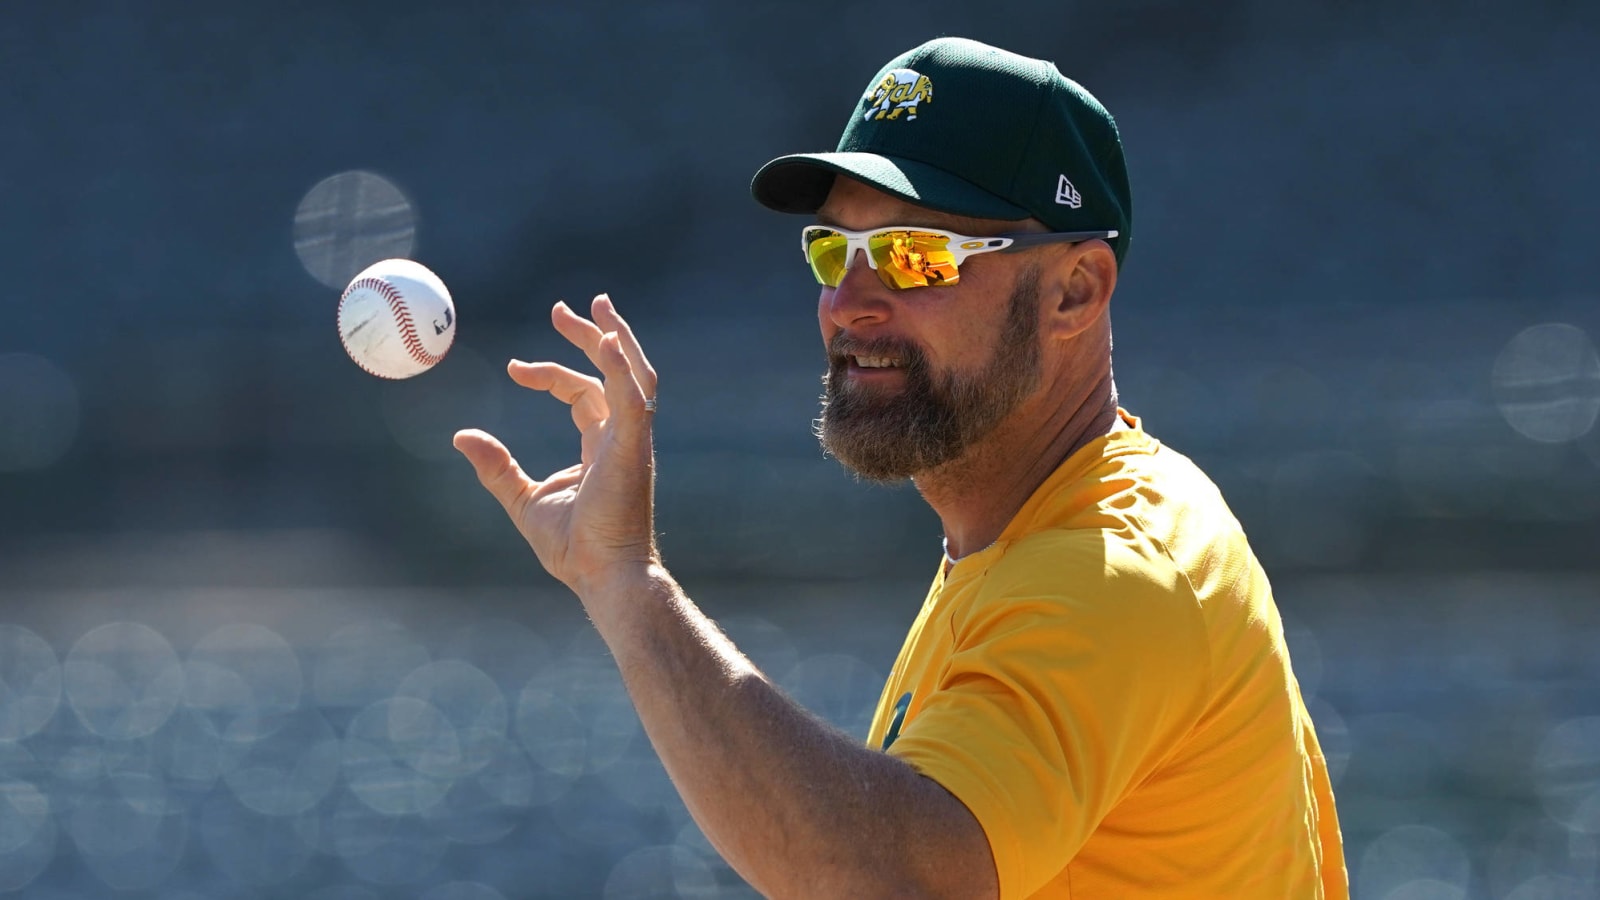 Athletics could hire Mark Kotsay as their next manager?